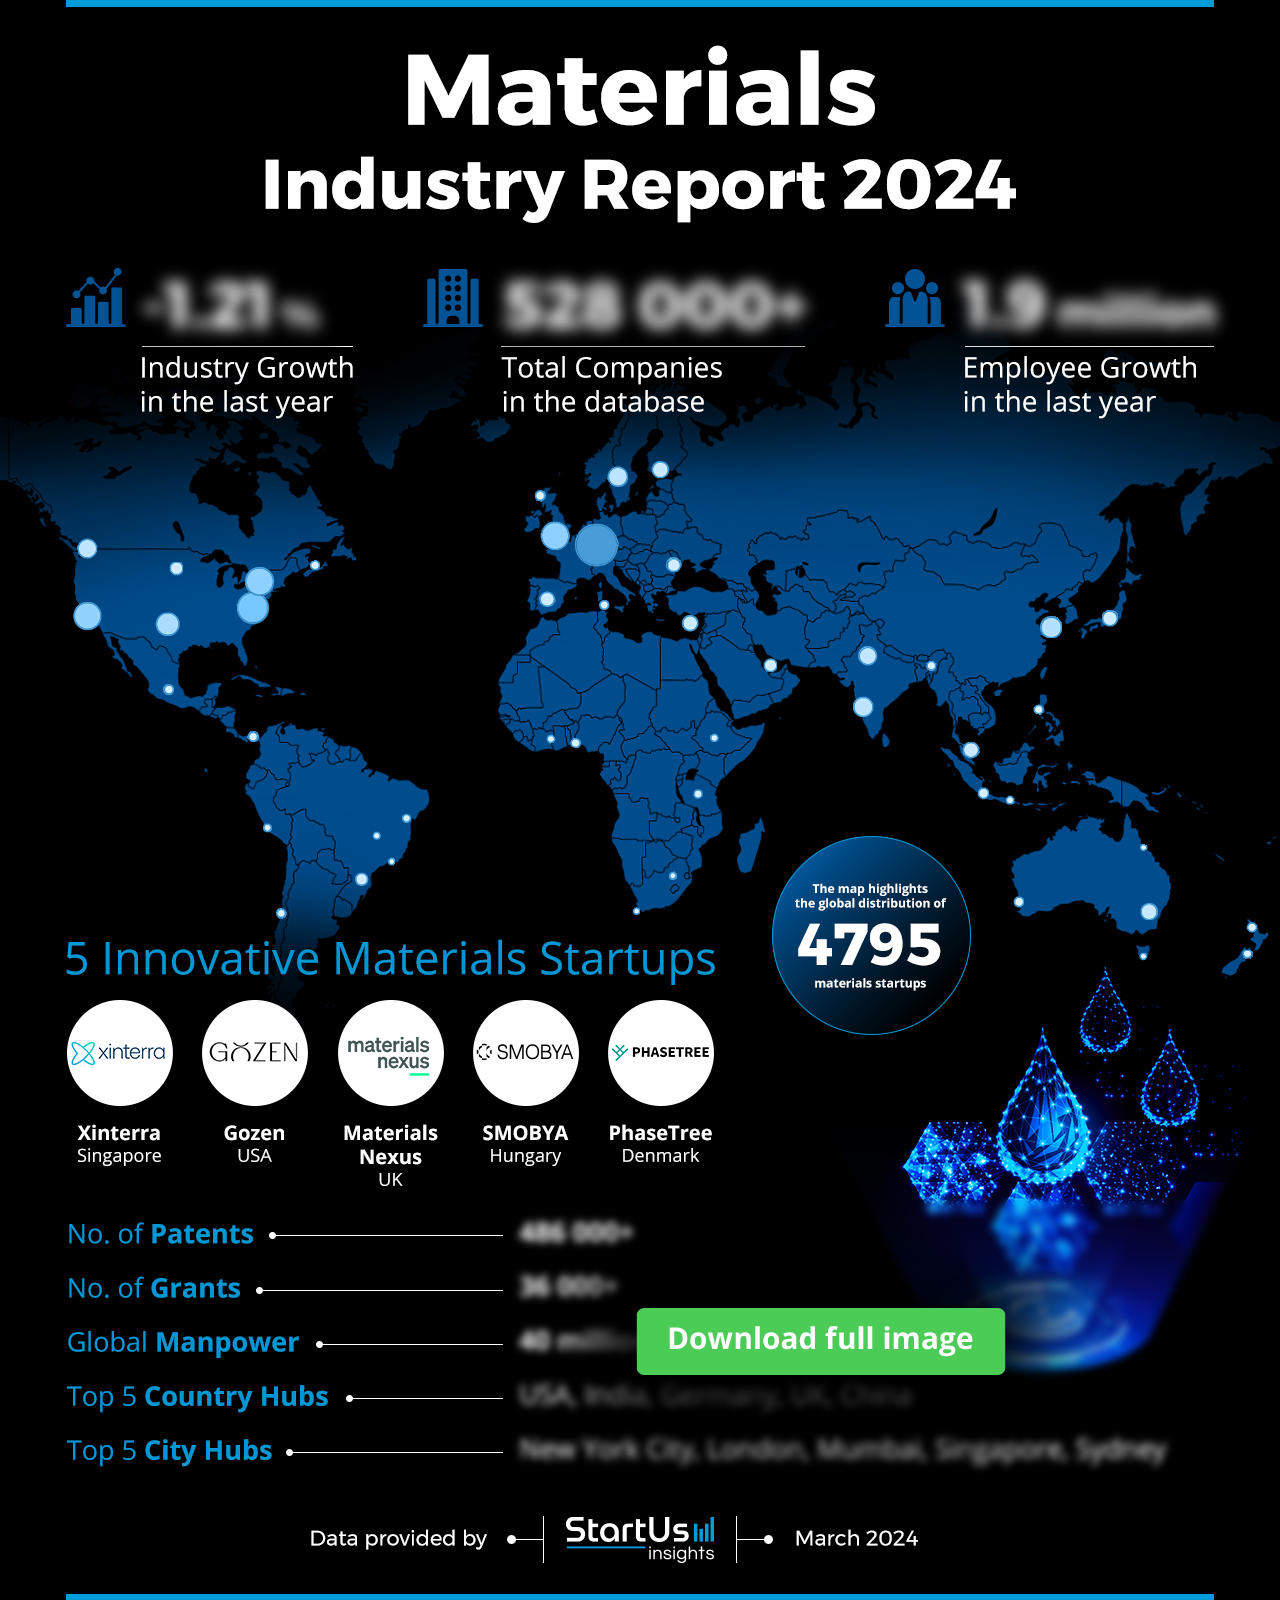 Materials-Industry-Report-HeatMap-Blurred-StartUs-Insights-noresize